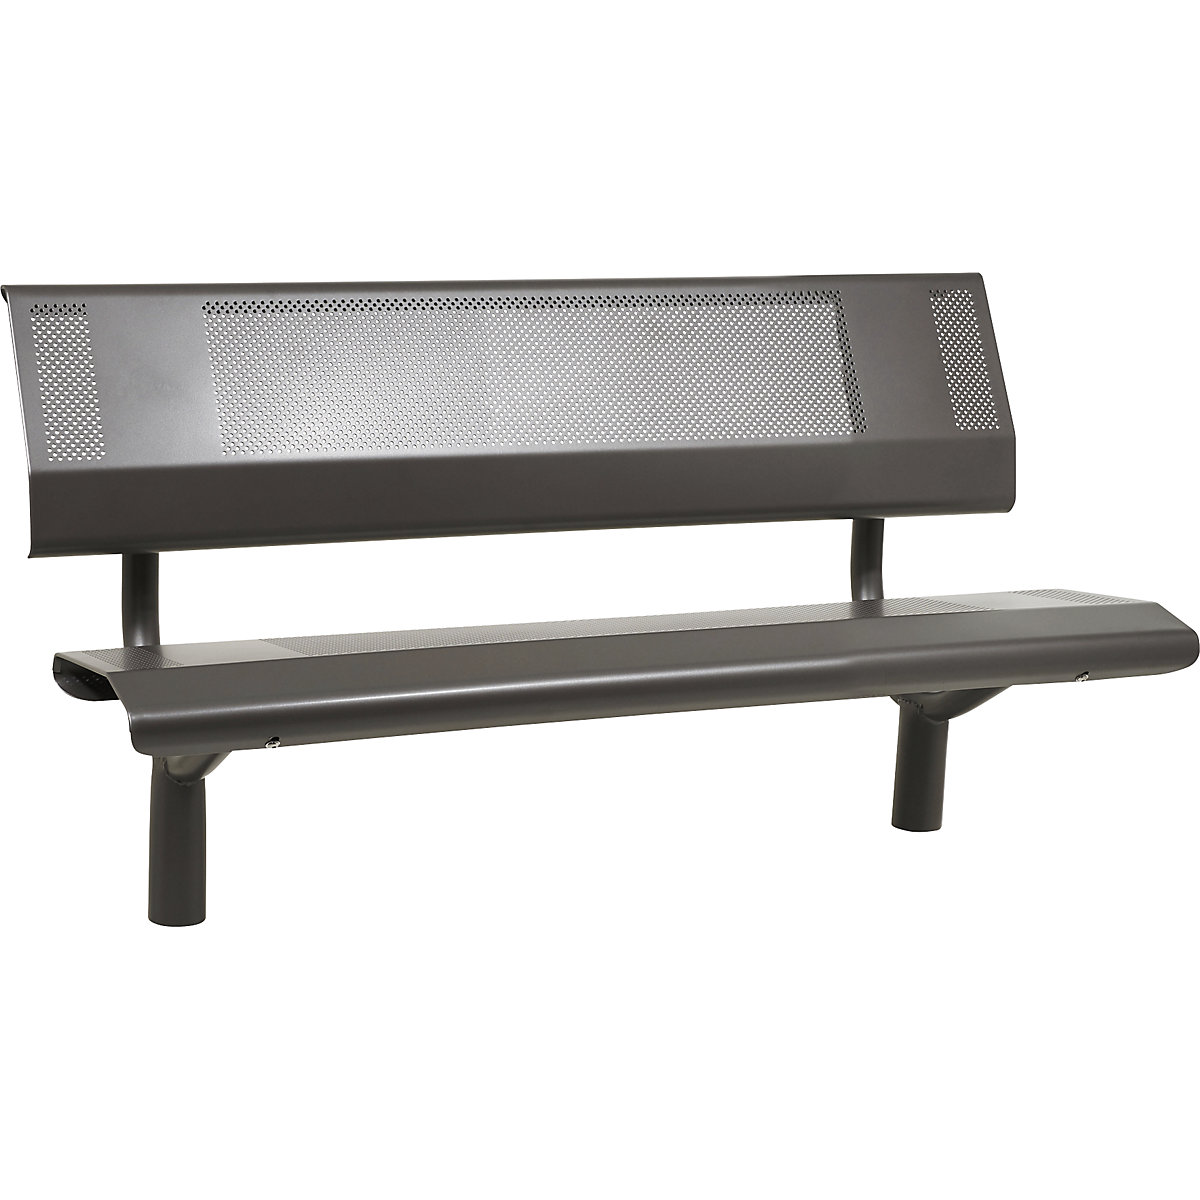 OSLO bench made of steel – PROCITY, seat height 450 mm, charcoal, with back rest-2